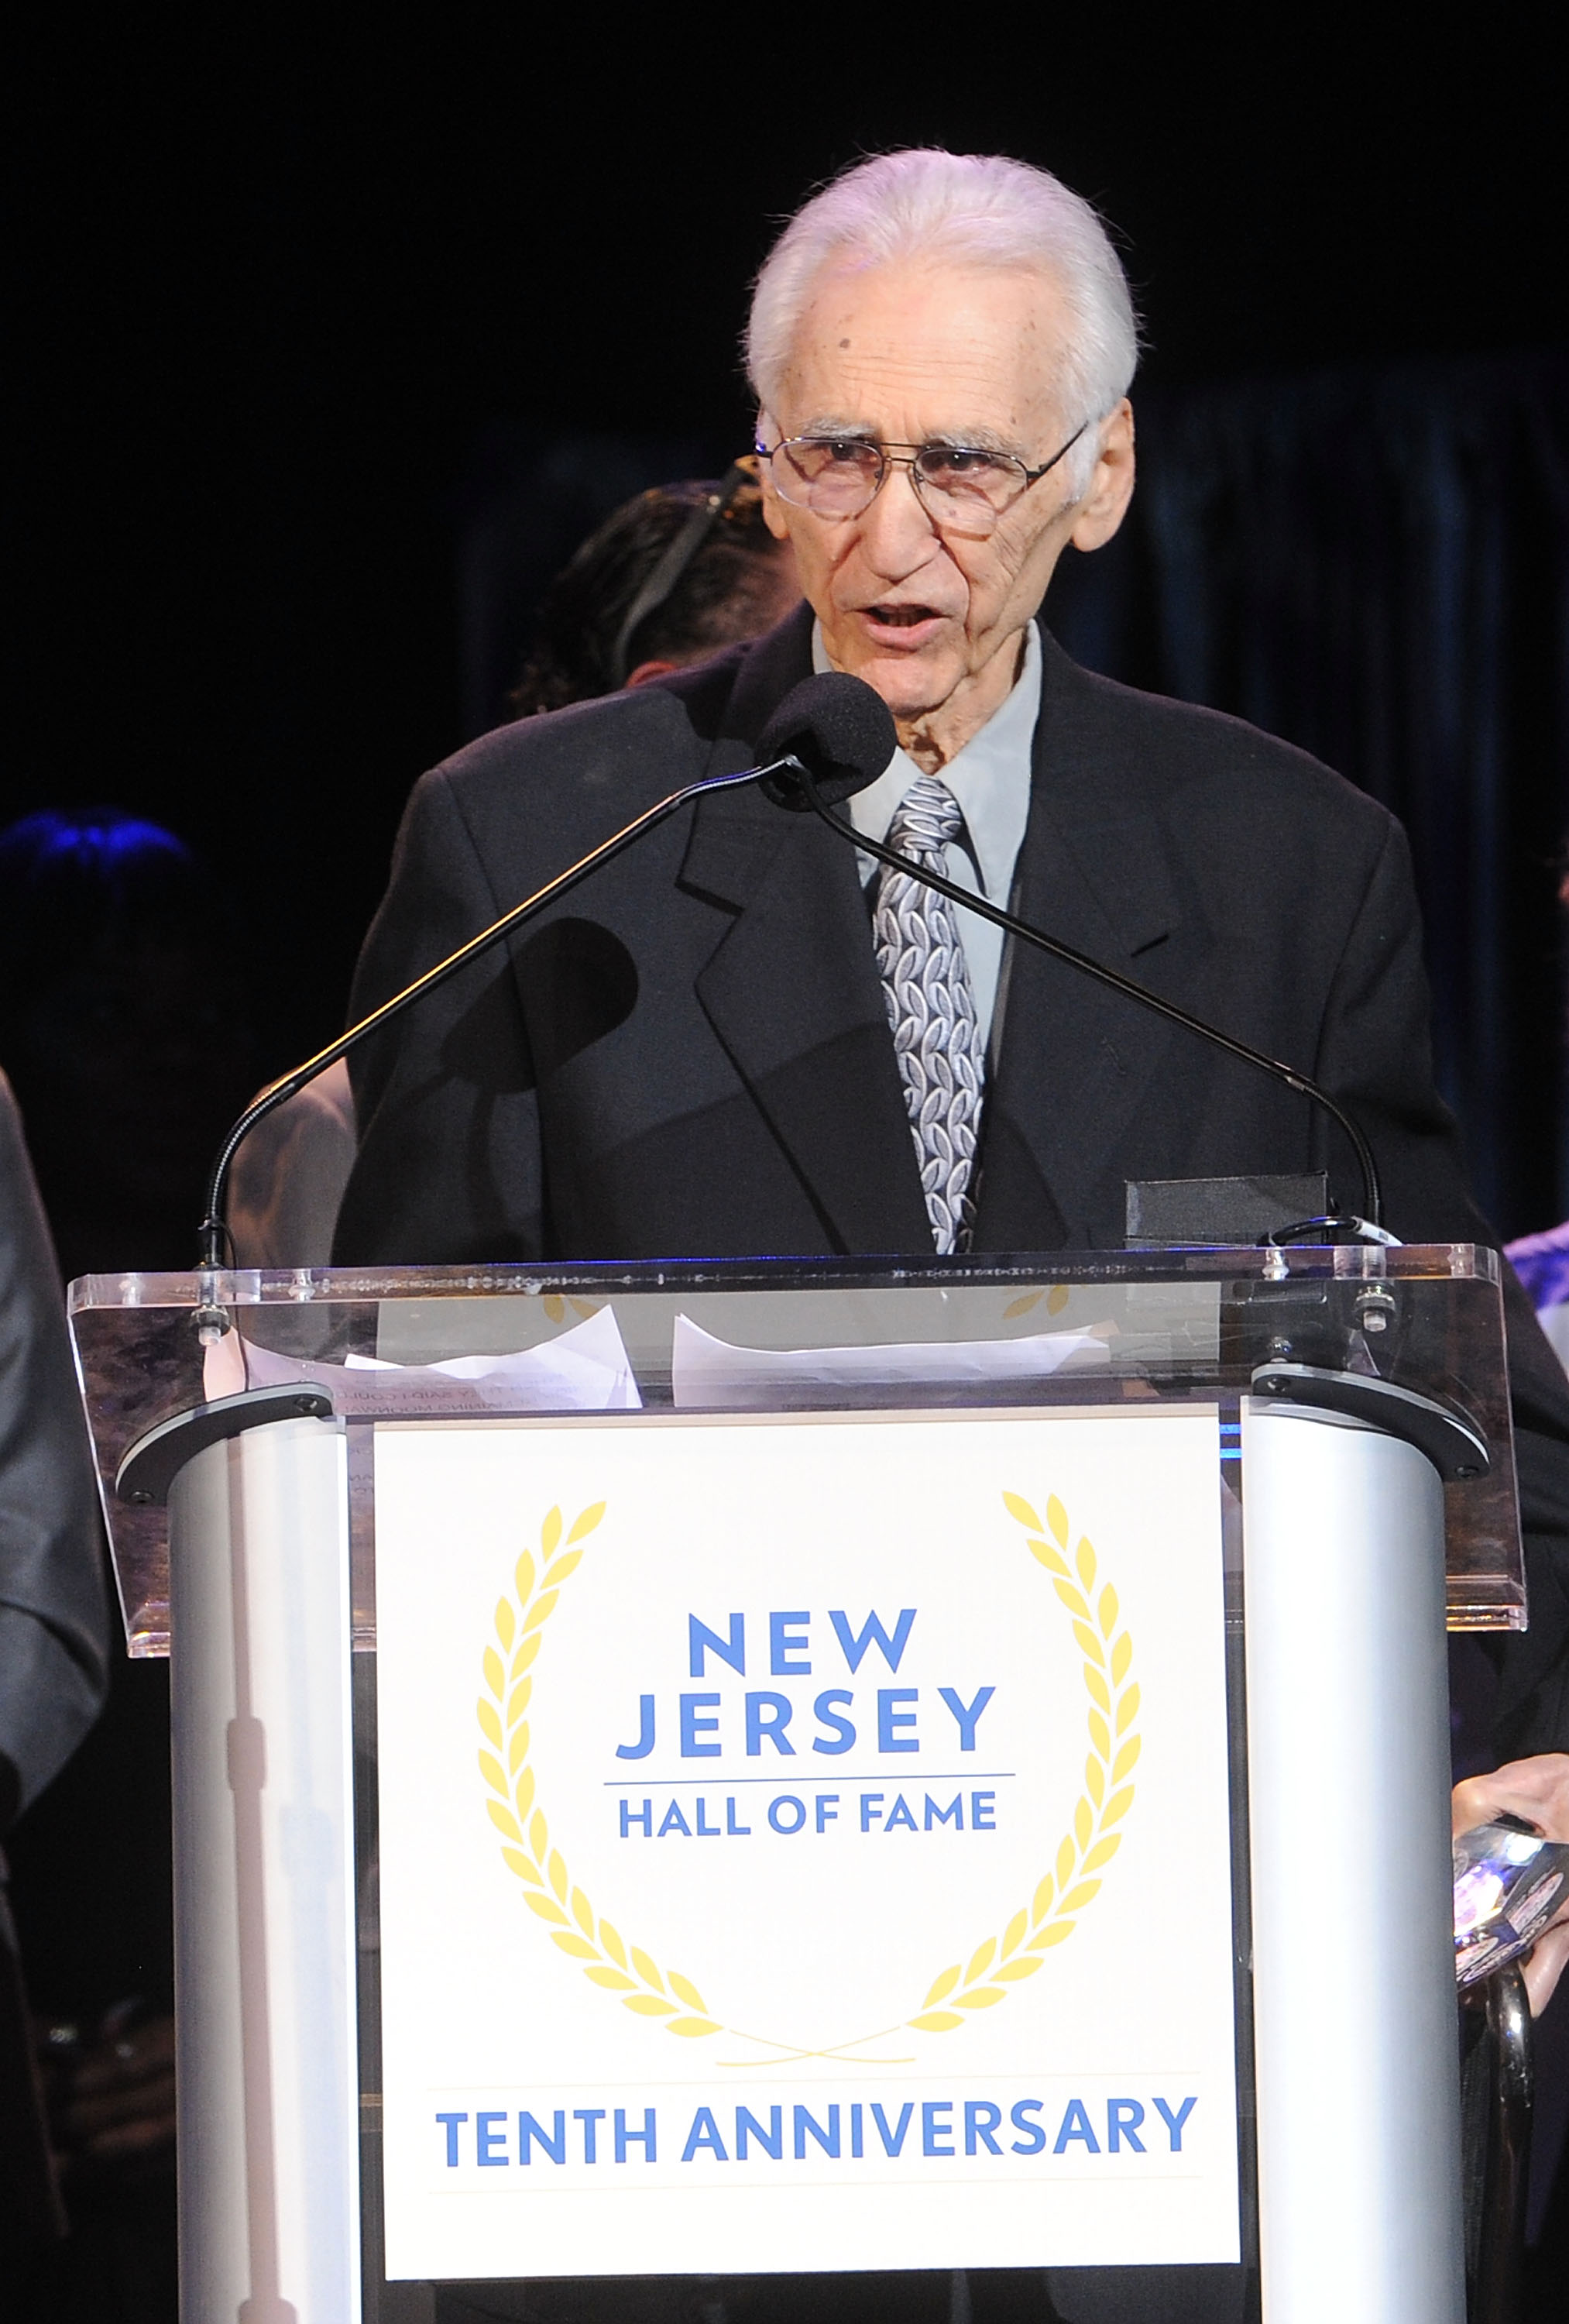 <p>Frankie Valli and The Four Seasons bassist Joe Long (born Joseph Louis LaBracio) died on April 21, 2021, from complications of COVID-19, close friend Anthony Newell, a member of the Jersey Four tribute band of which Joe was the musical director, told NJ.com. The New Jersey Hall of Fame member was 88. Former bandmates Frankie Valli and Bob Gaudio also confirmed Joe's passing in a statement. Another former Four Seasons bandmate, Tommy DeVito, <a href="https://www.wonderwall.com/celebrity/stars-who-died-coronavirus-covid-19-3022682.gallery?photoId=381986">also died from coronavirus complications</a> in September 2020.</p>